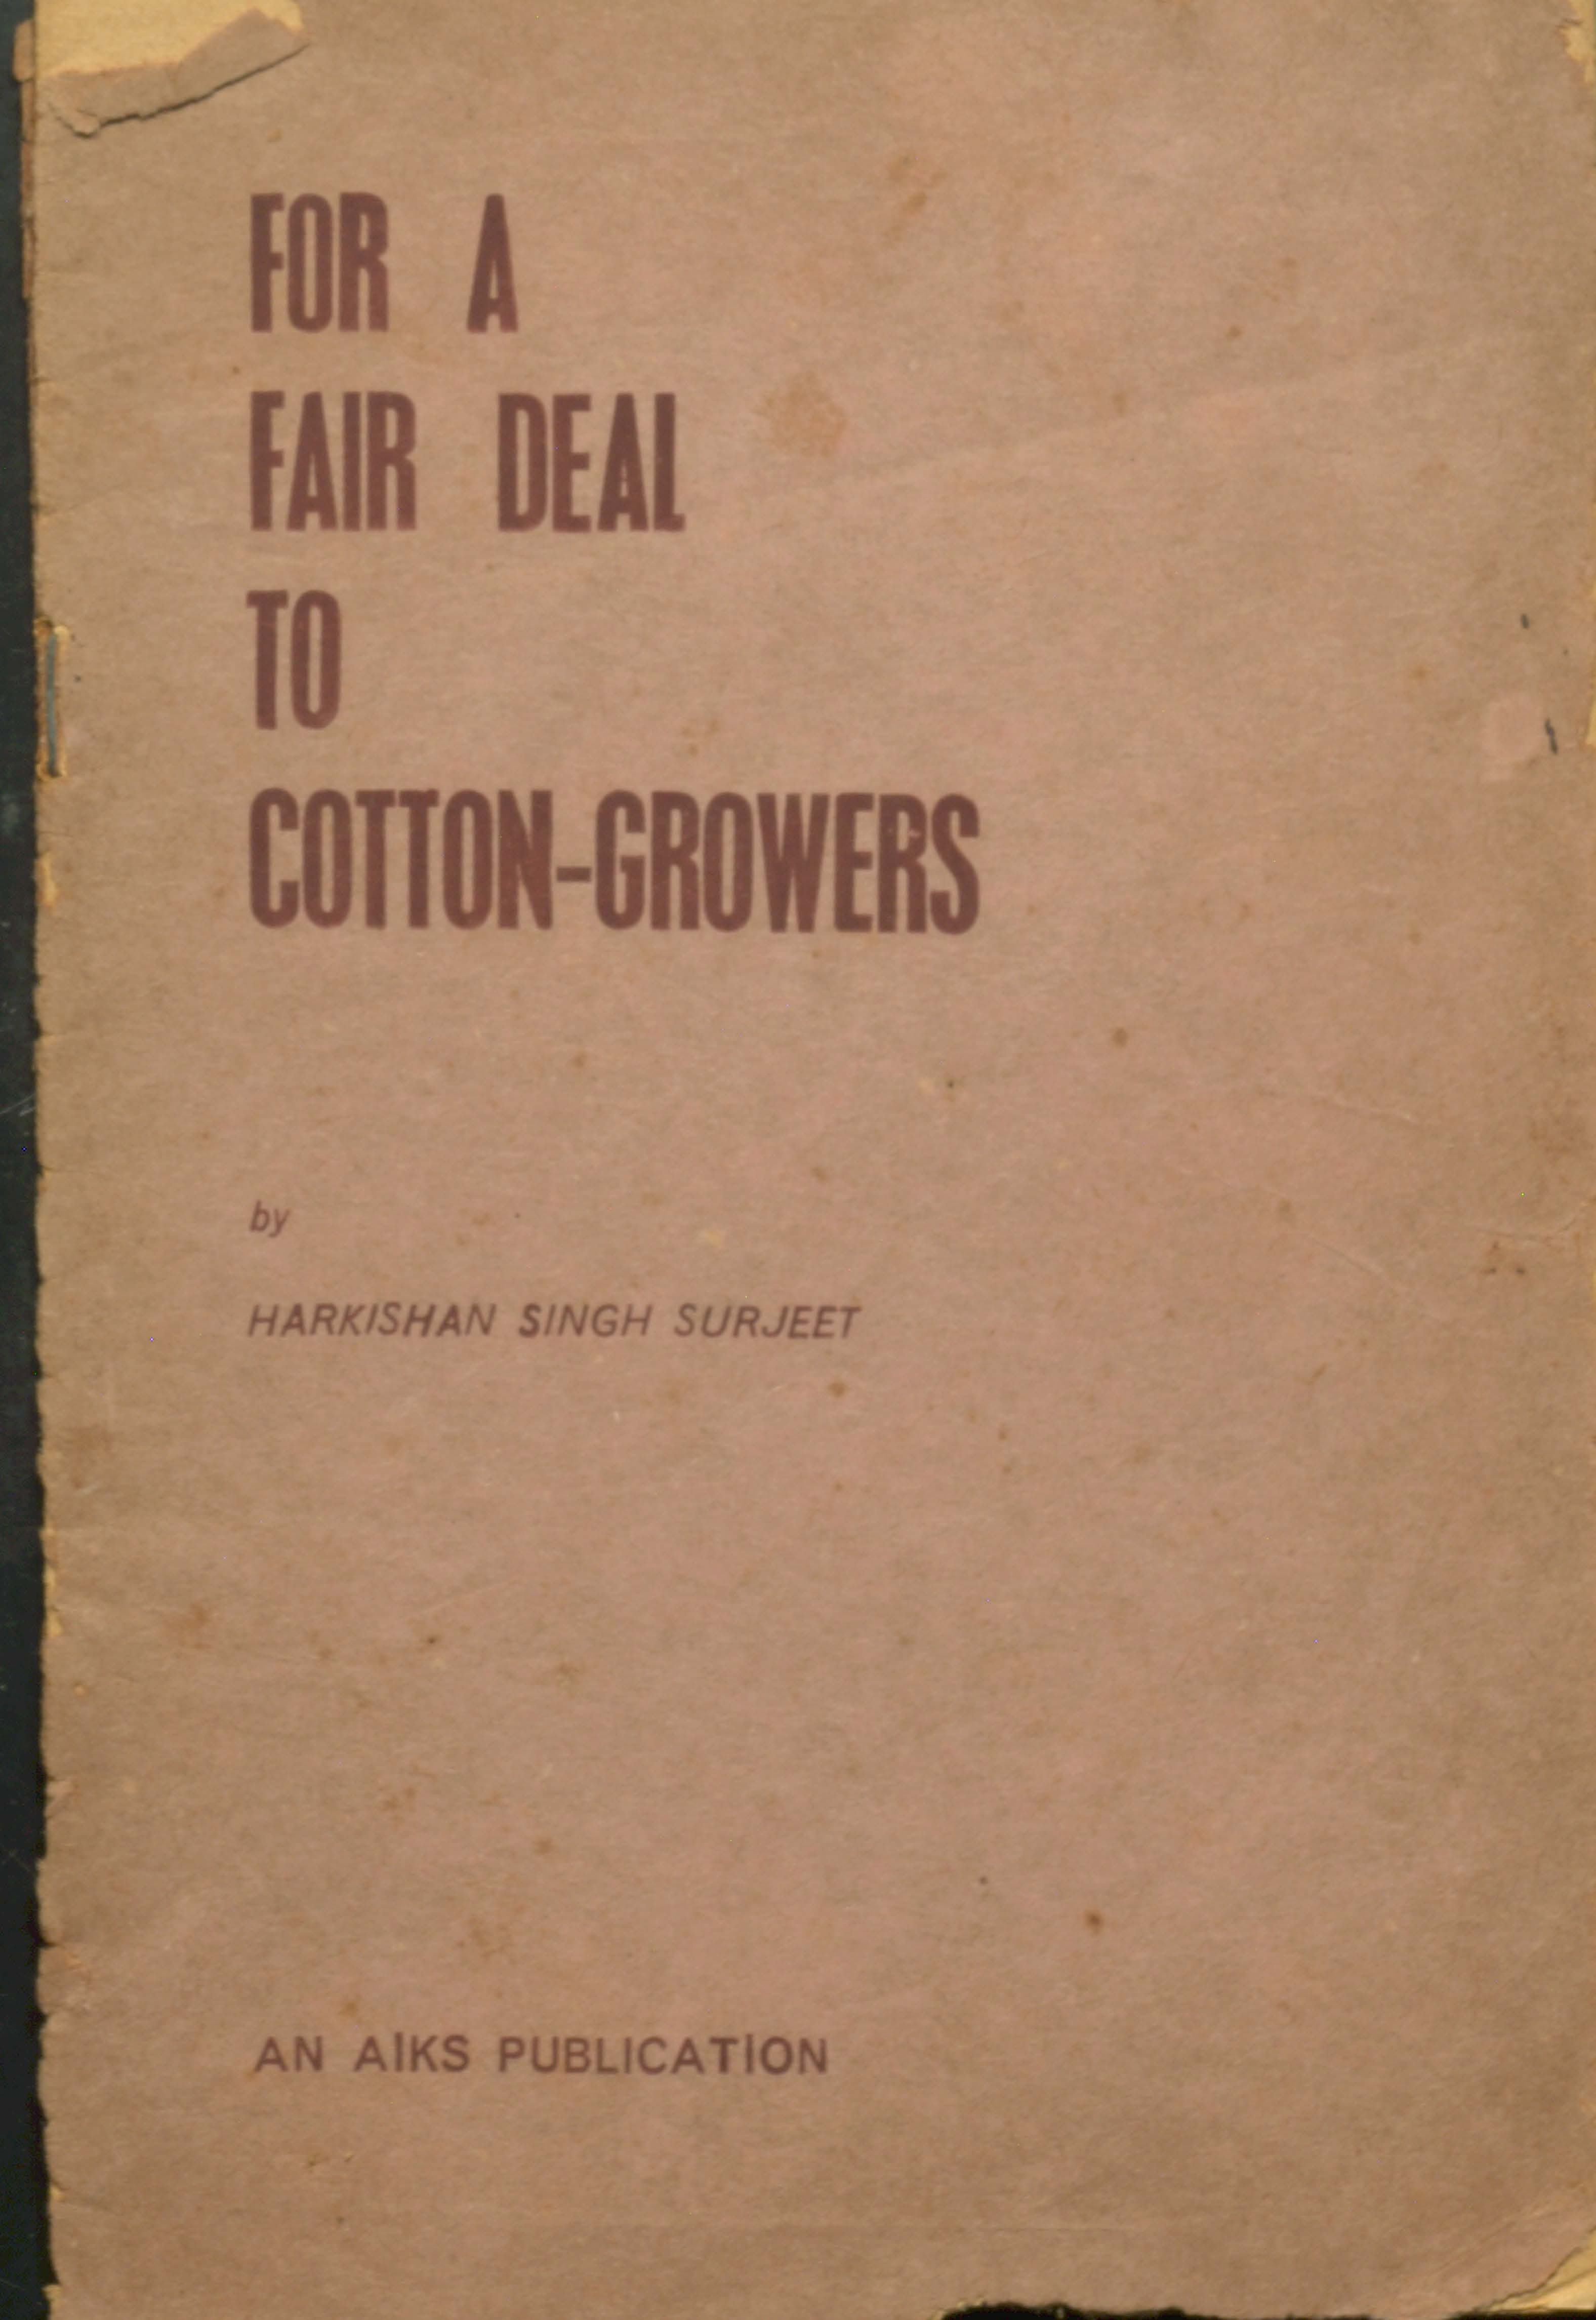 For A Fair Deal To Cotton - growers